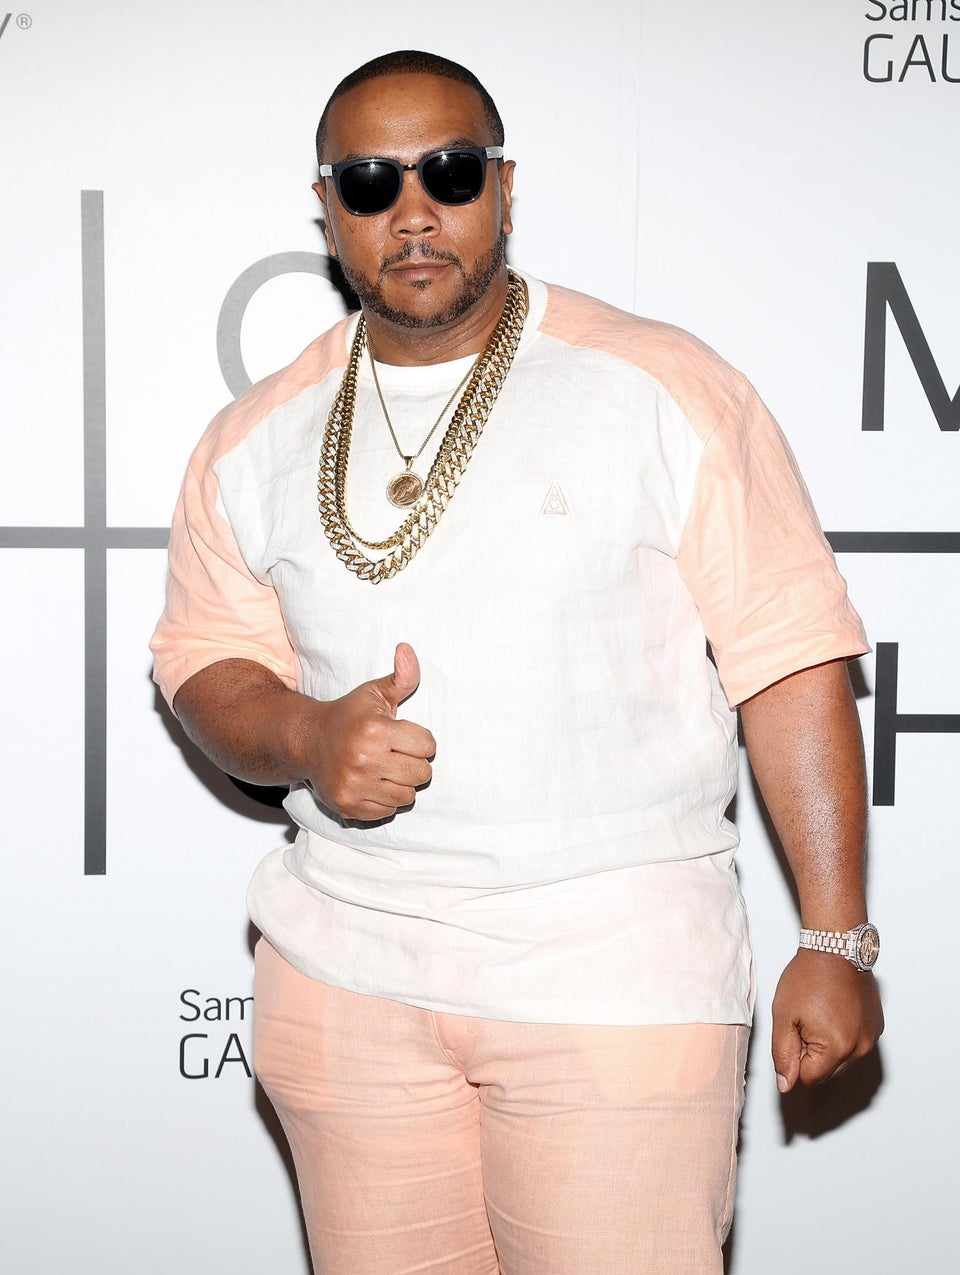 Hard Work Pays Off! Timbaland Shares Incredible Weight Loss Pic